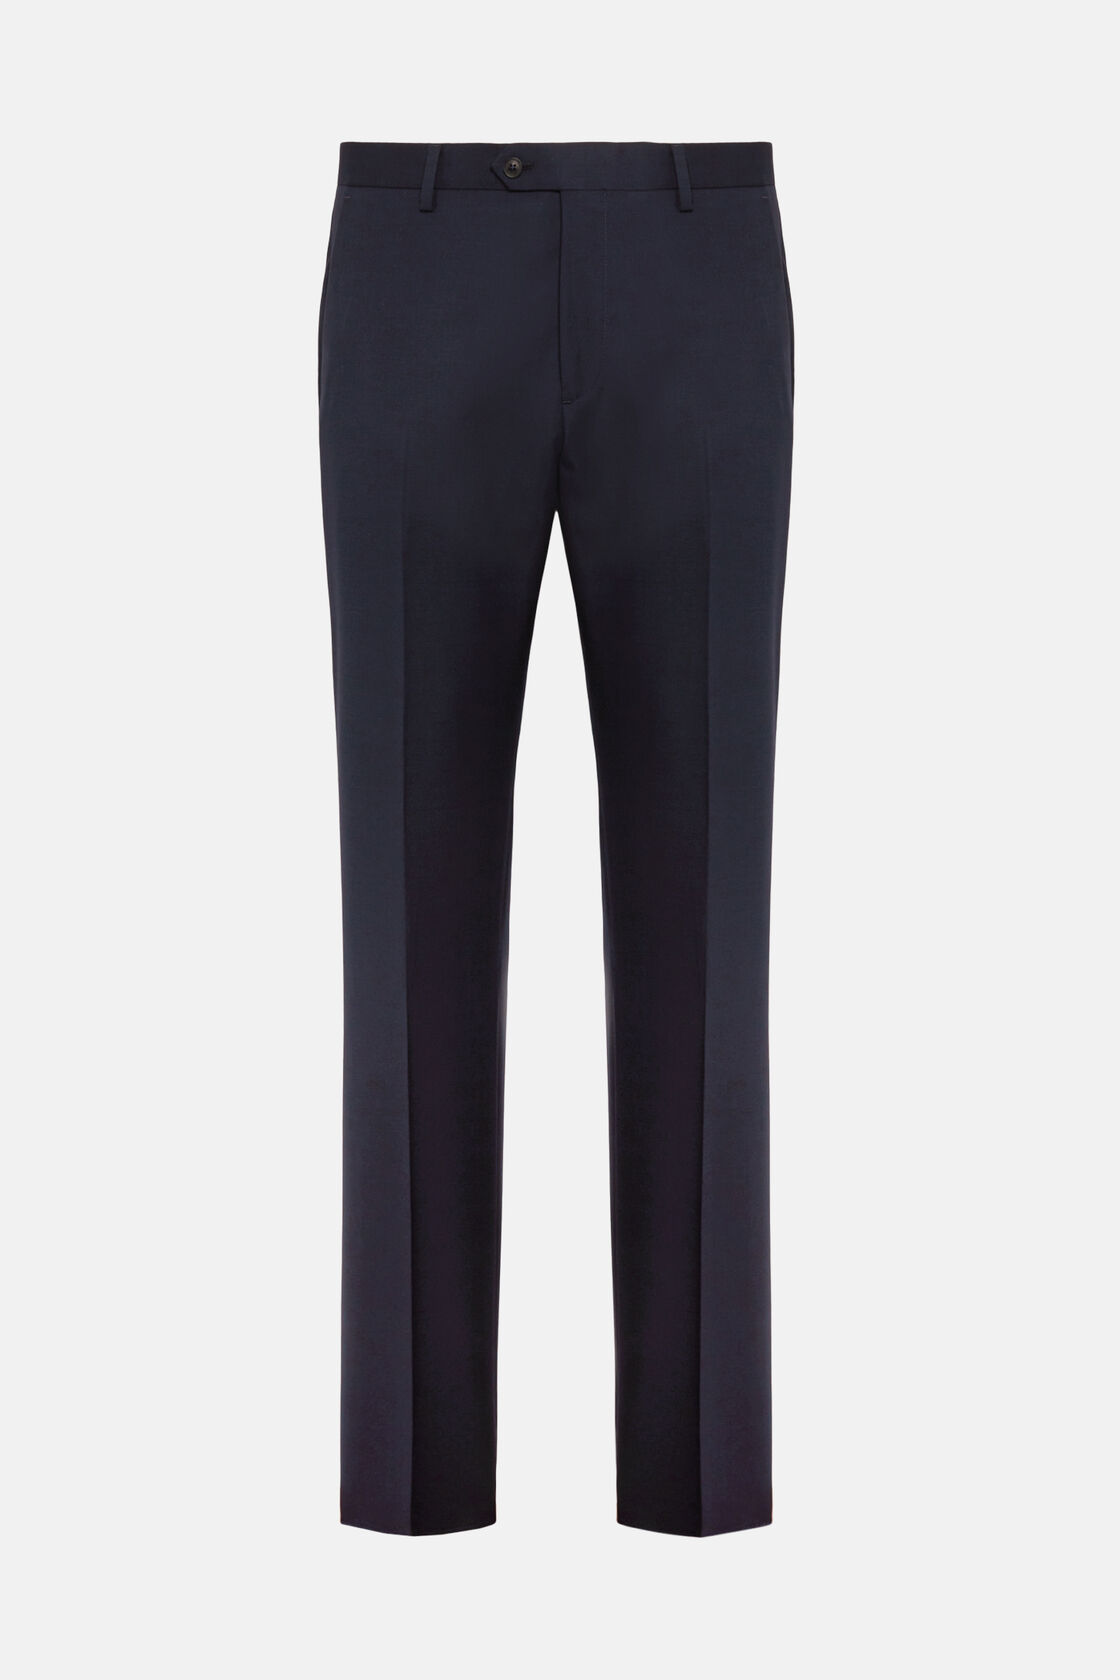 Micro patterned stretch wool Pants, Navy blue, hi-res